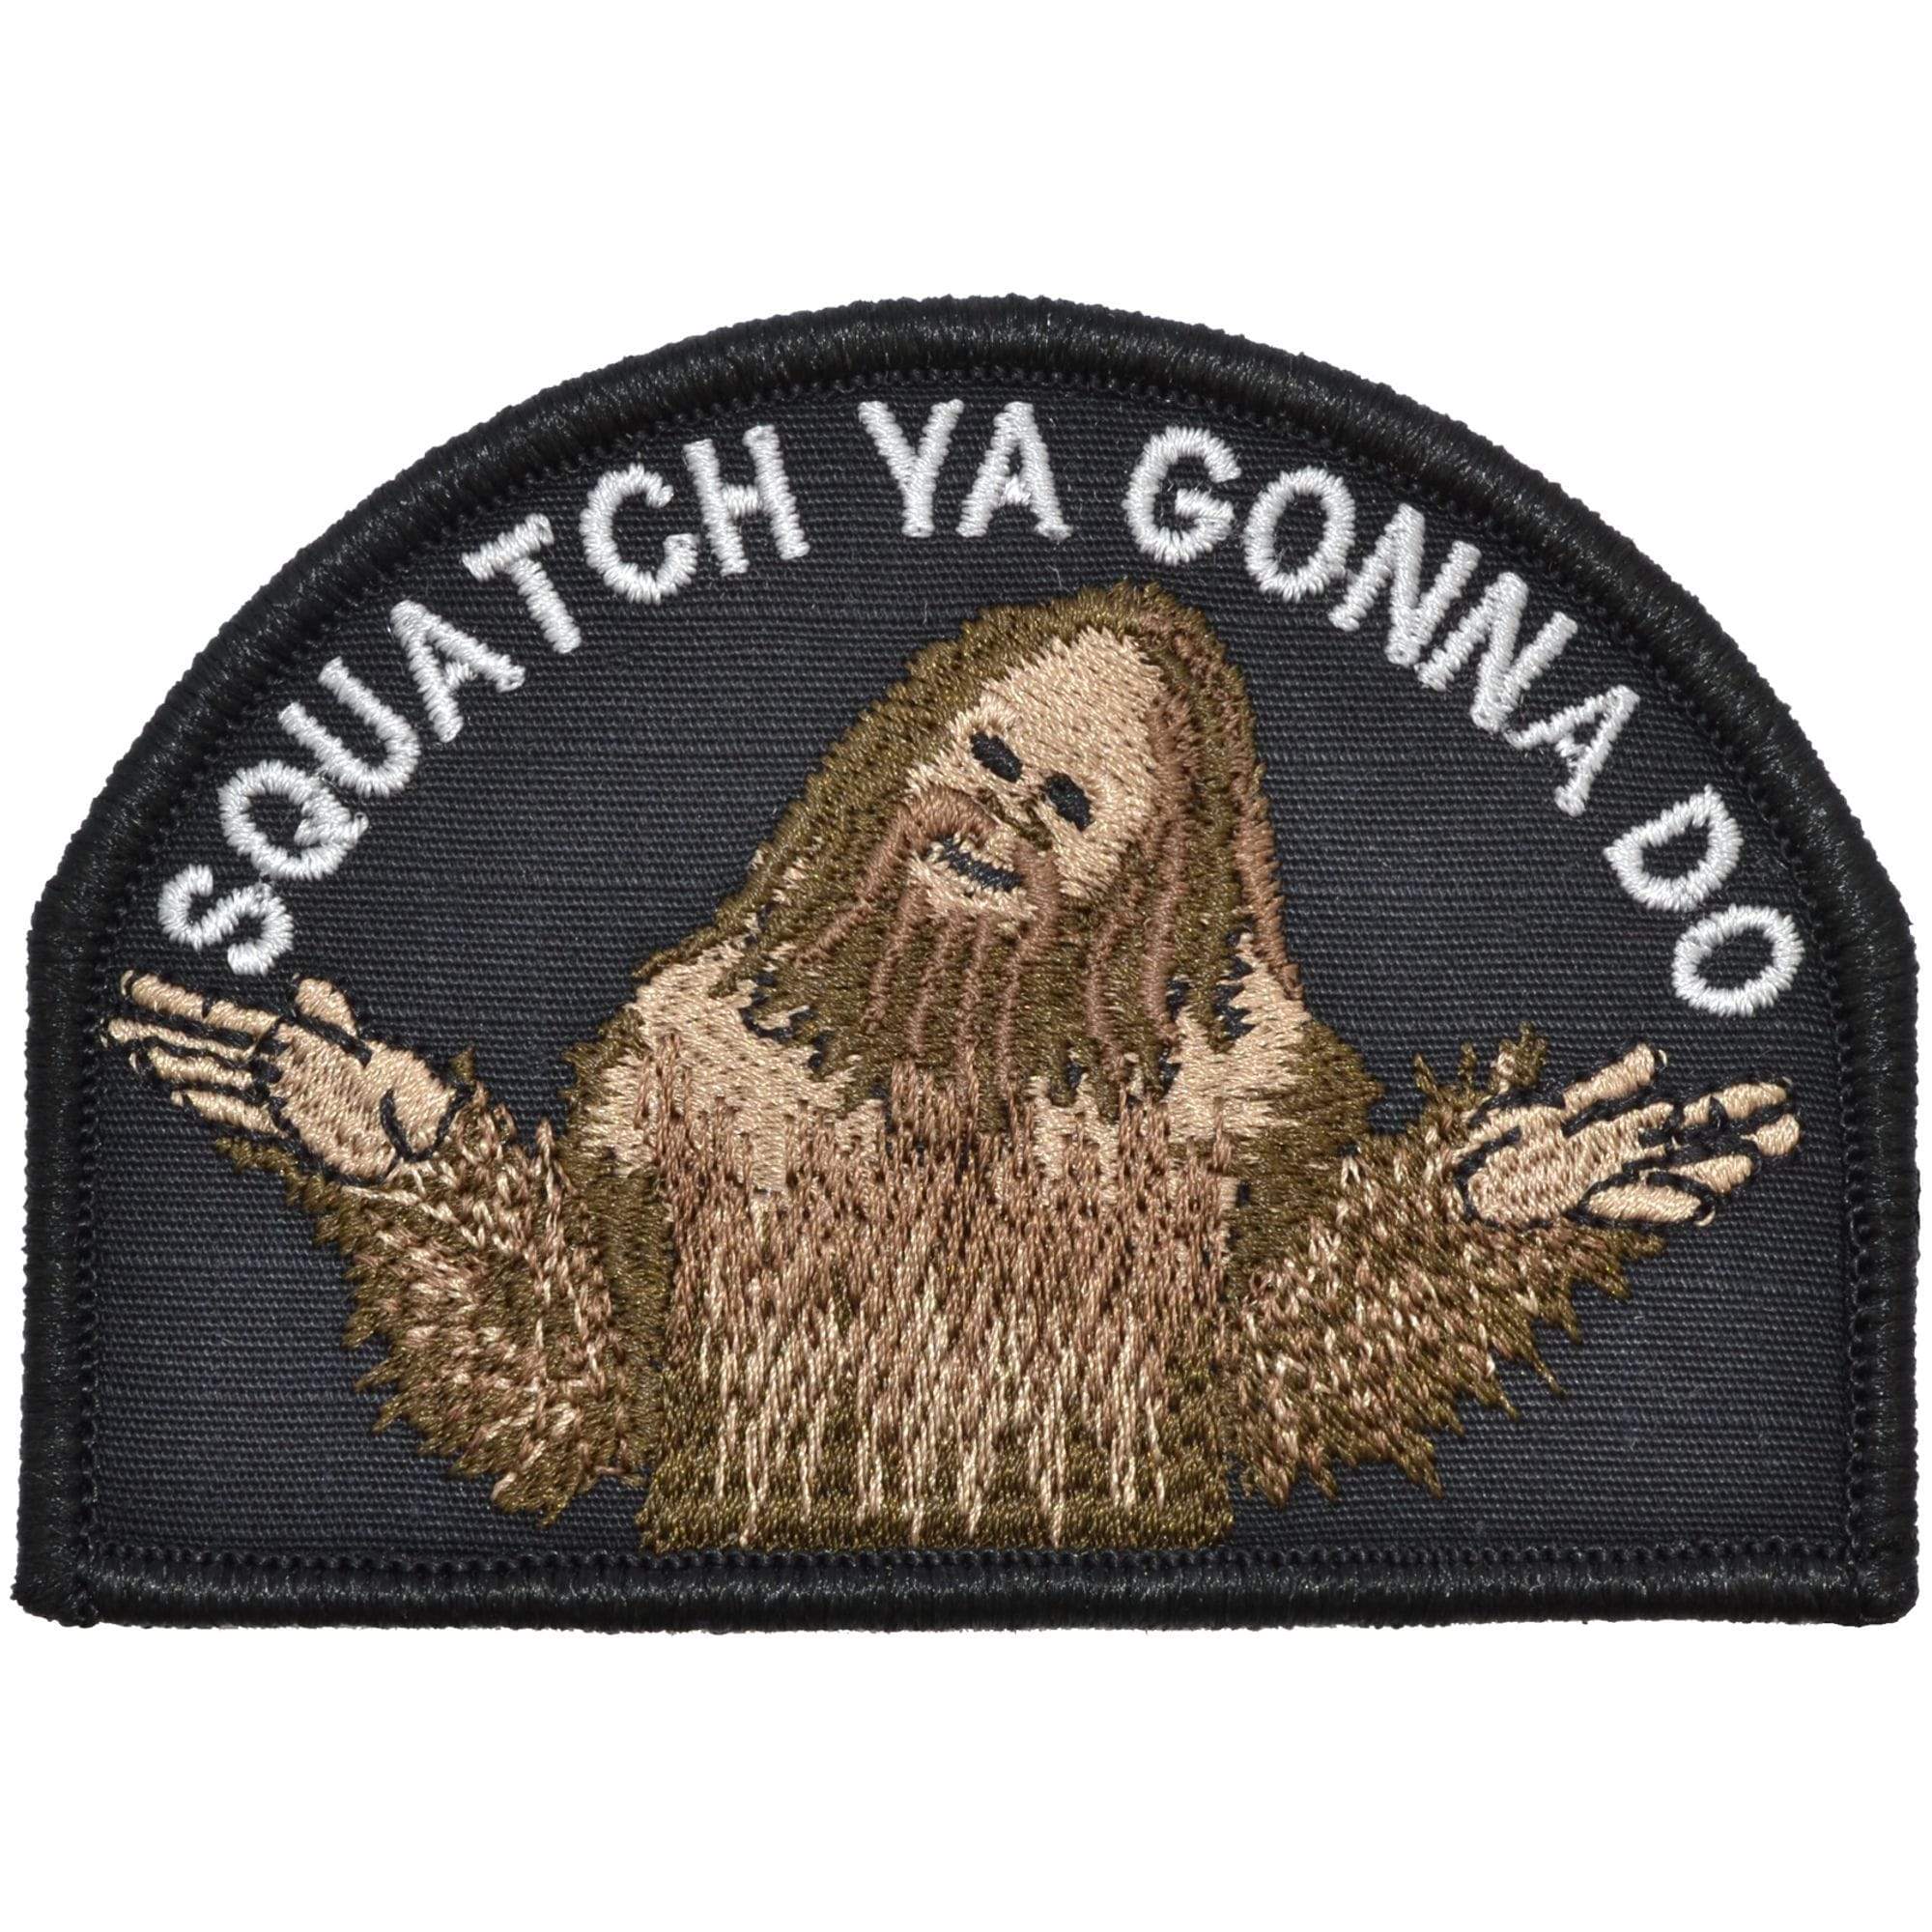 Tactical Gear Junkie Patches Black Squatch Ya Gonna Do - 2.75x4 Patch